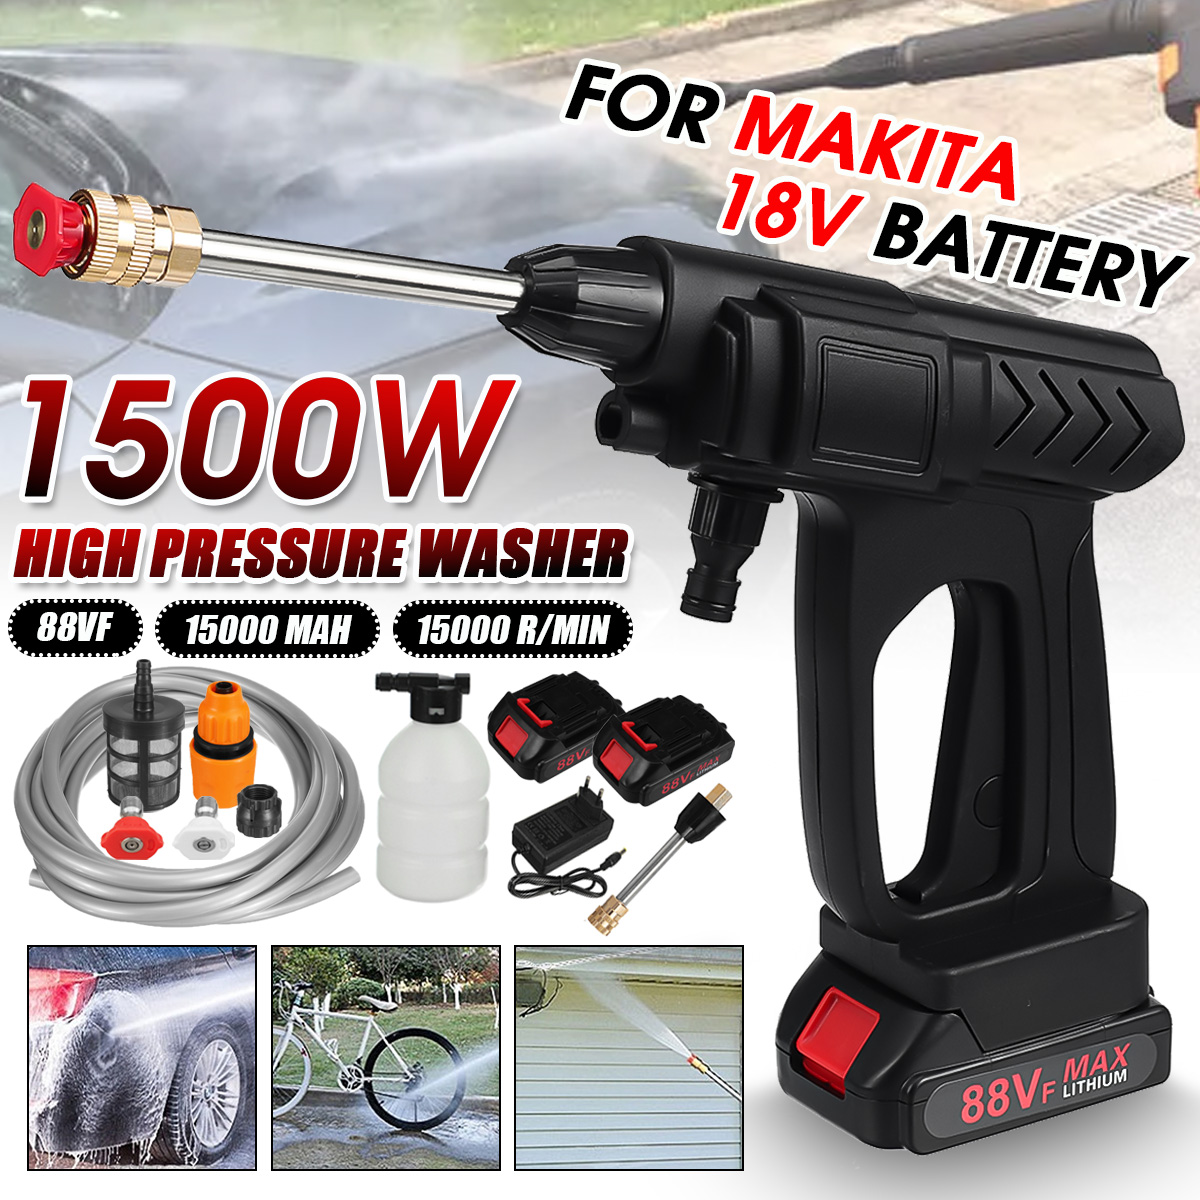 1500W-15000rm-Cordless-High-Pressure-Washer-Spray-Guns-Nozzle-Cleaner-For-Makita-18V-Battery-1893539-1